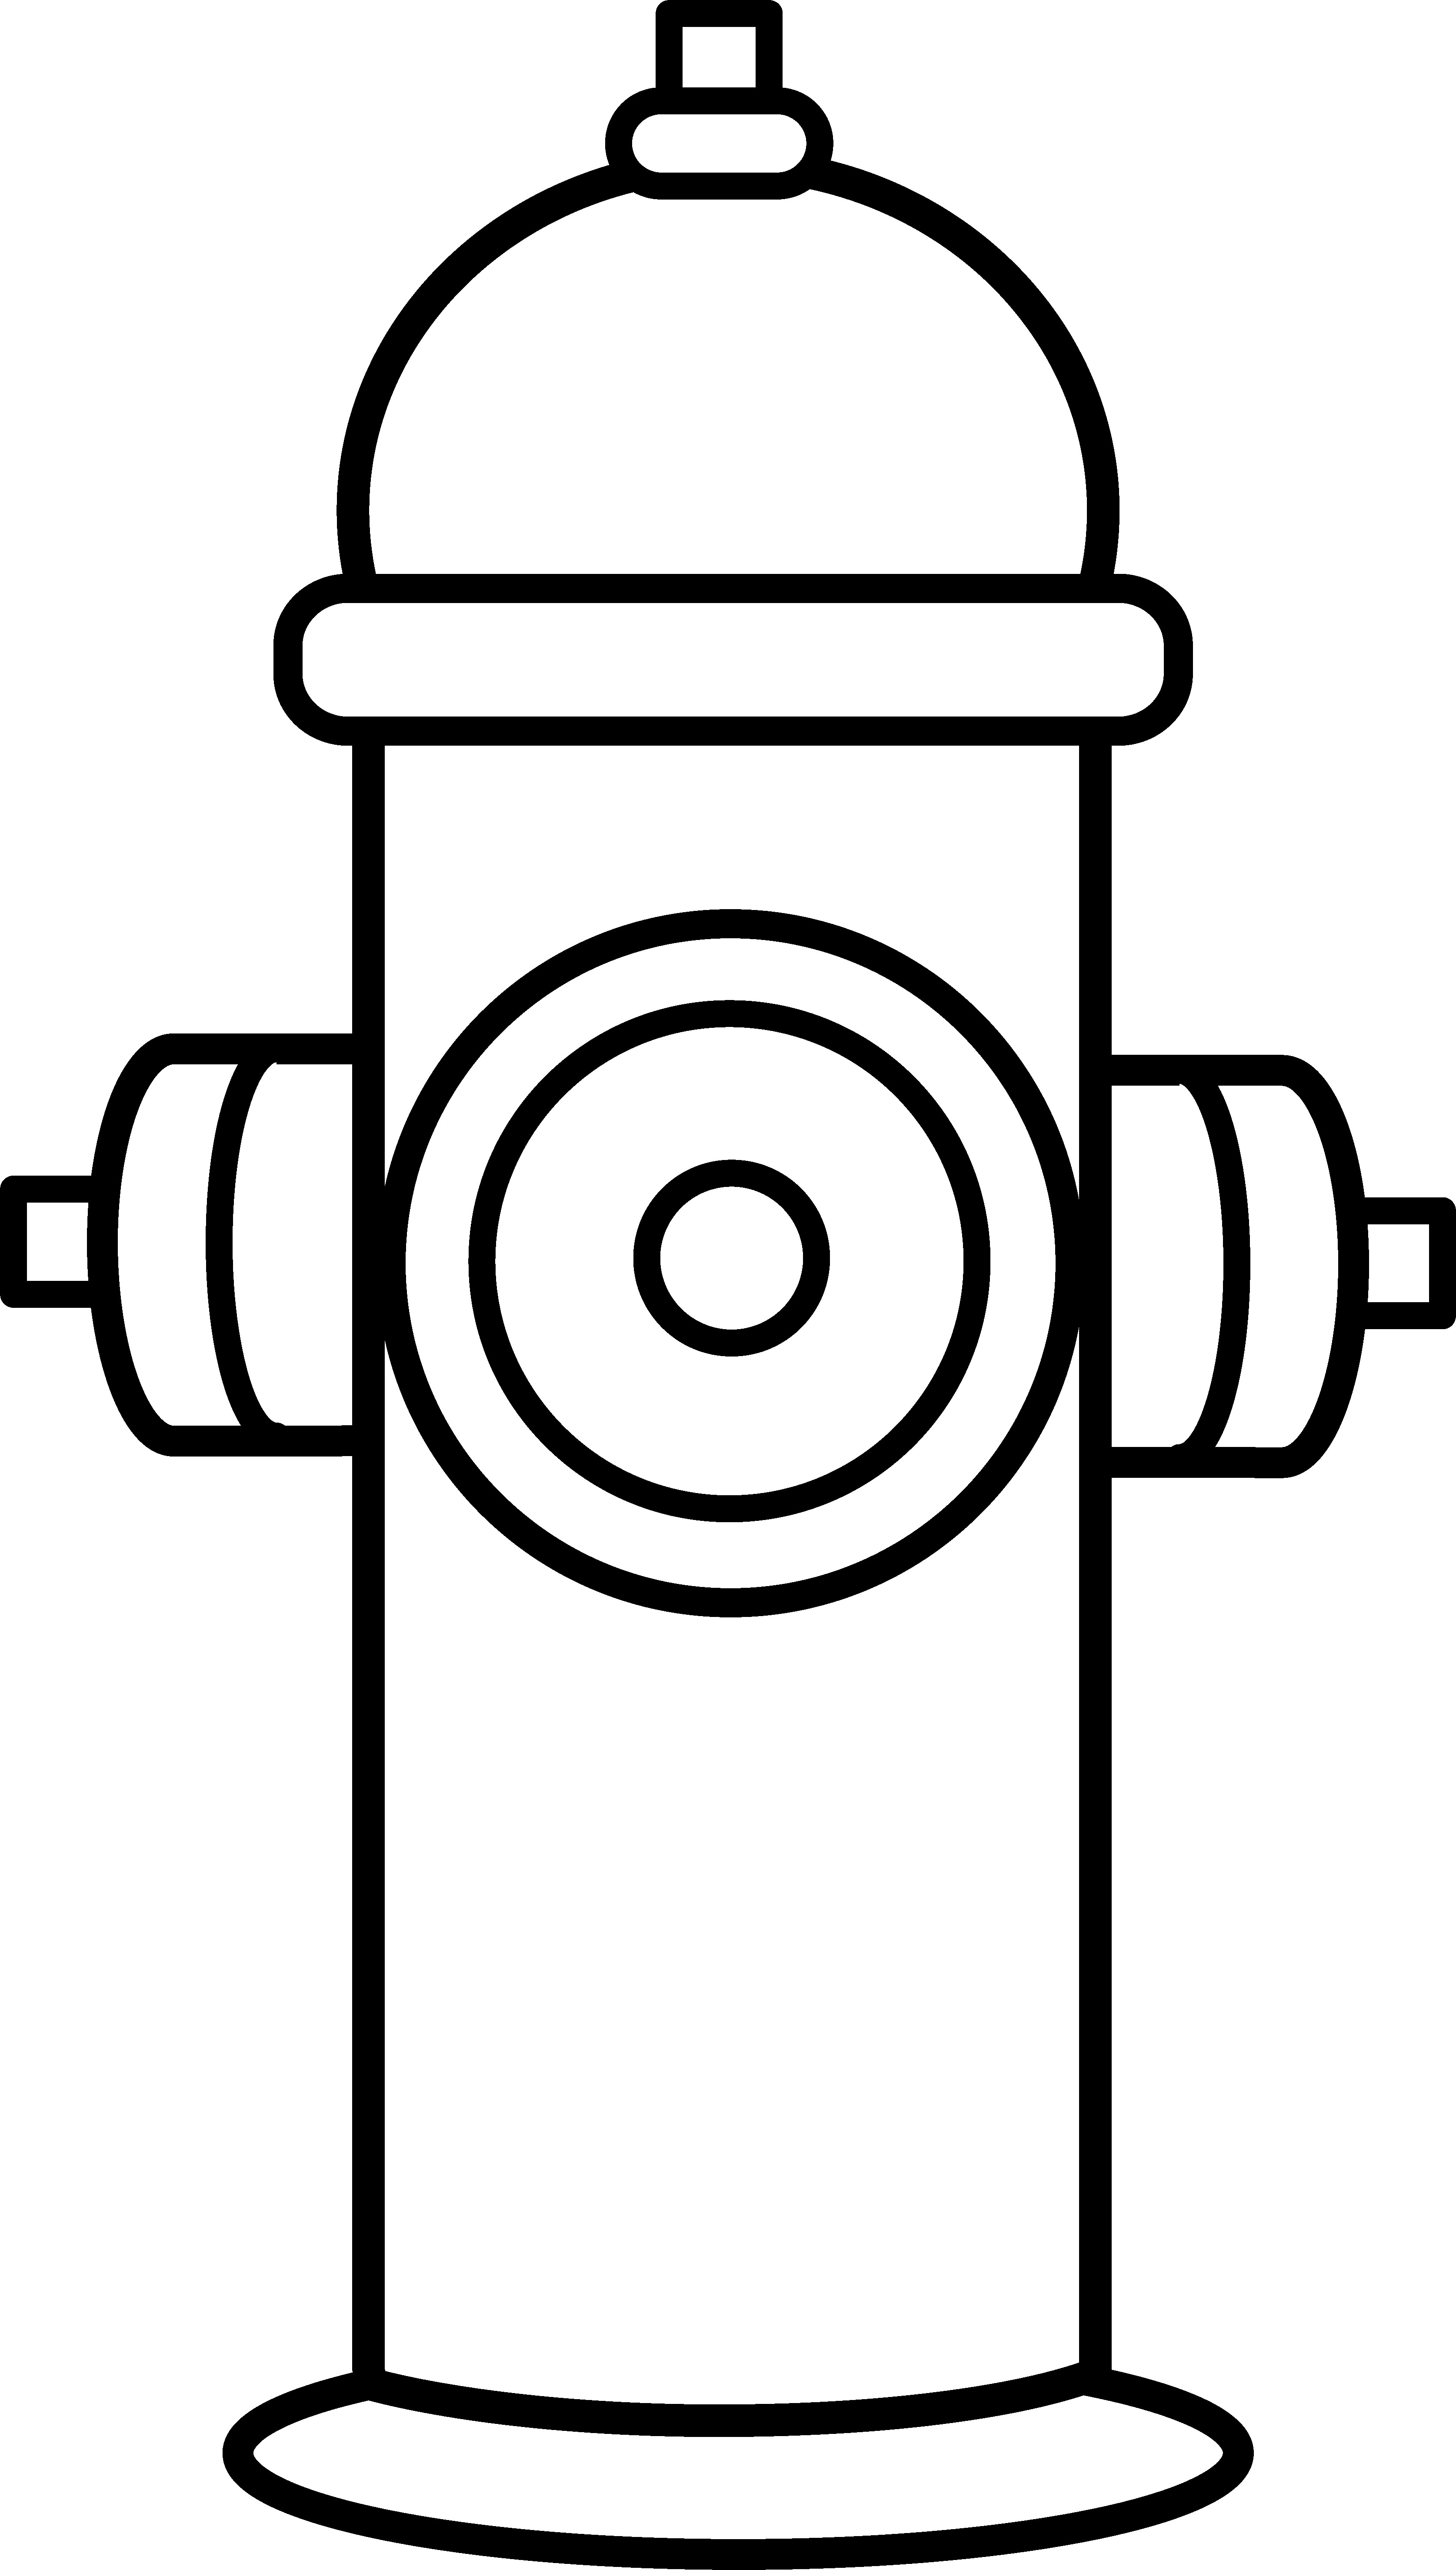 Fire Hydrant Coloring Page Free Clip Art